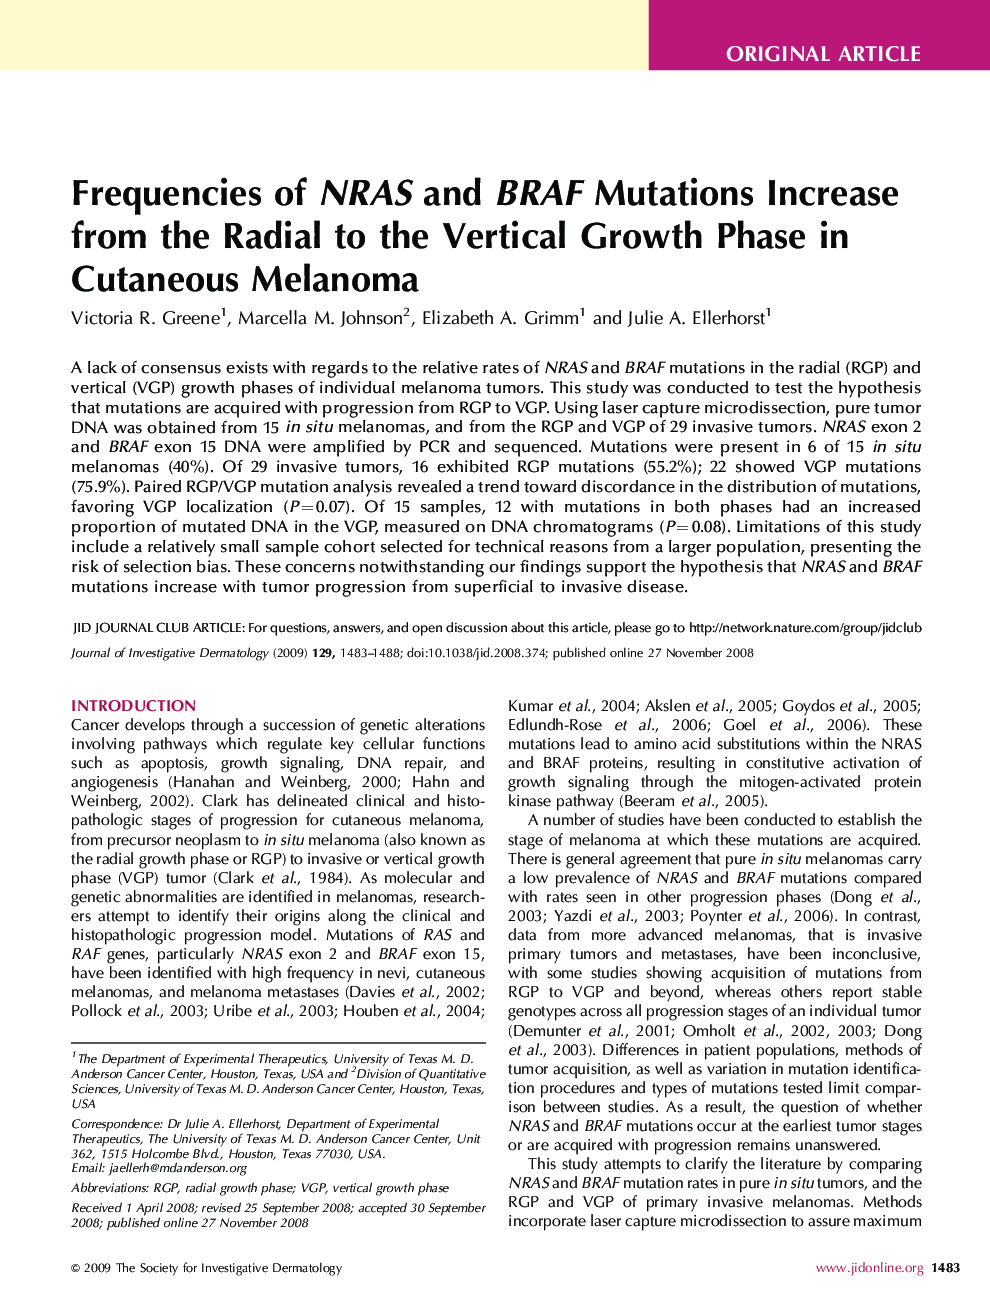 Frequencies of NRAS and BRAF Mutations Increase from the Radial to the Vertical Growth Phase in Cutaneous Melanoma